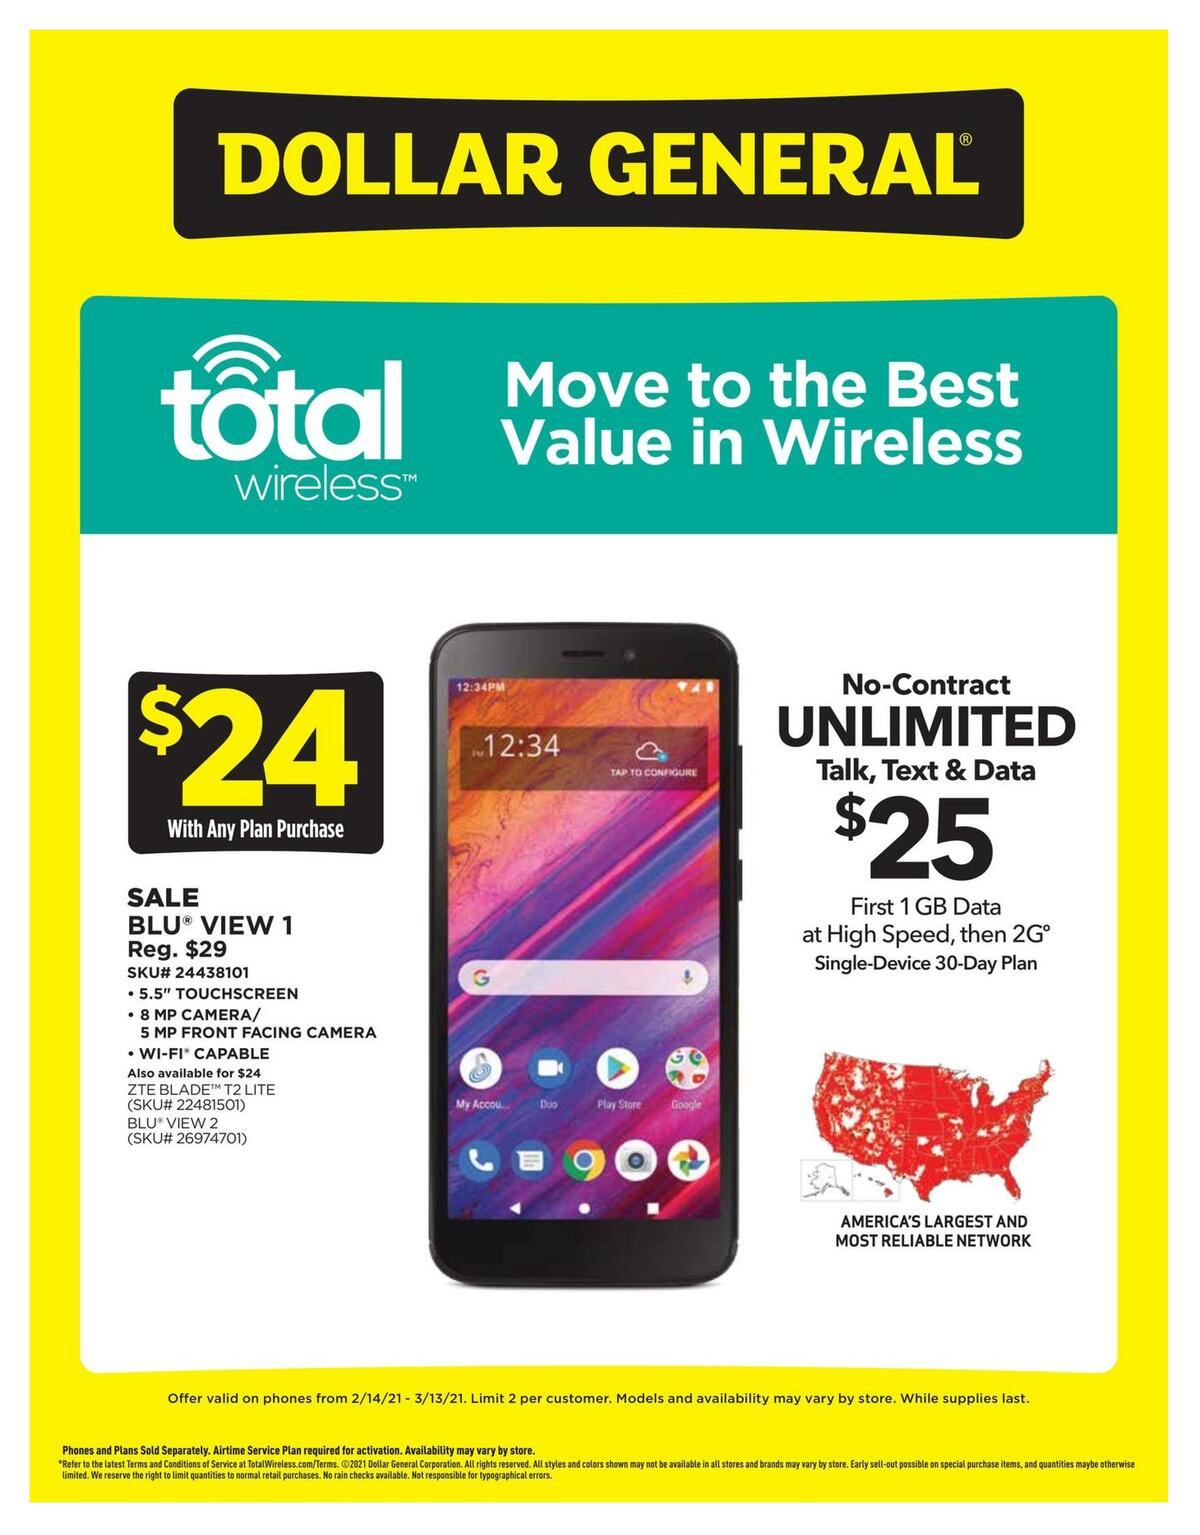 Dollar General Weekly Wireless Specials Weekly Ad from February 14